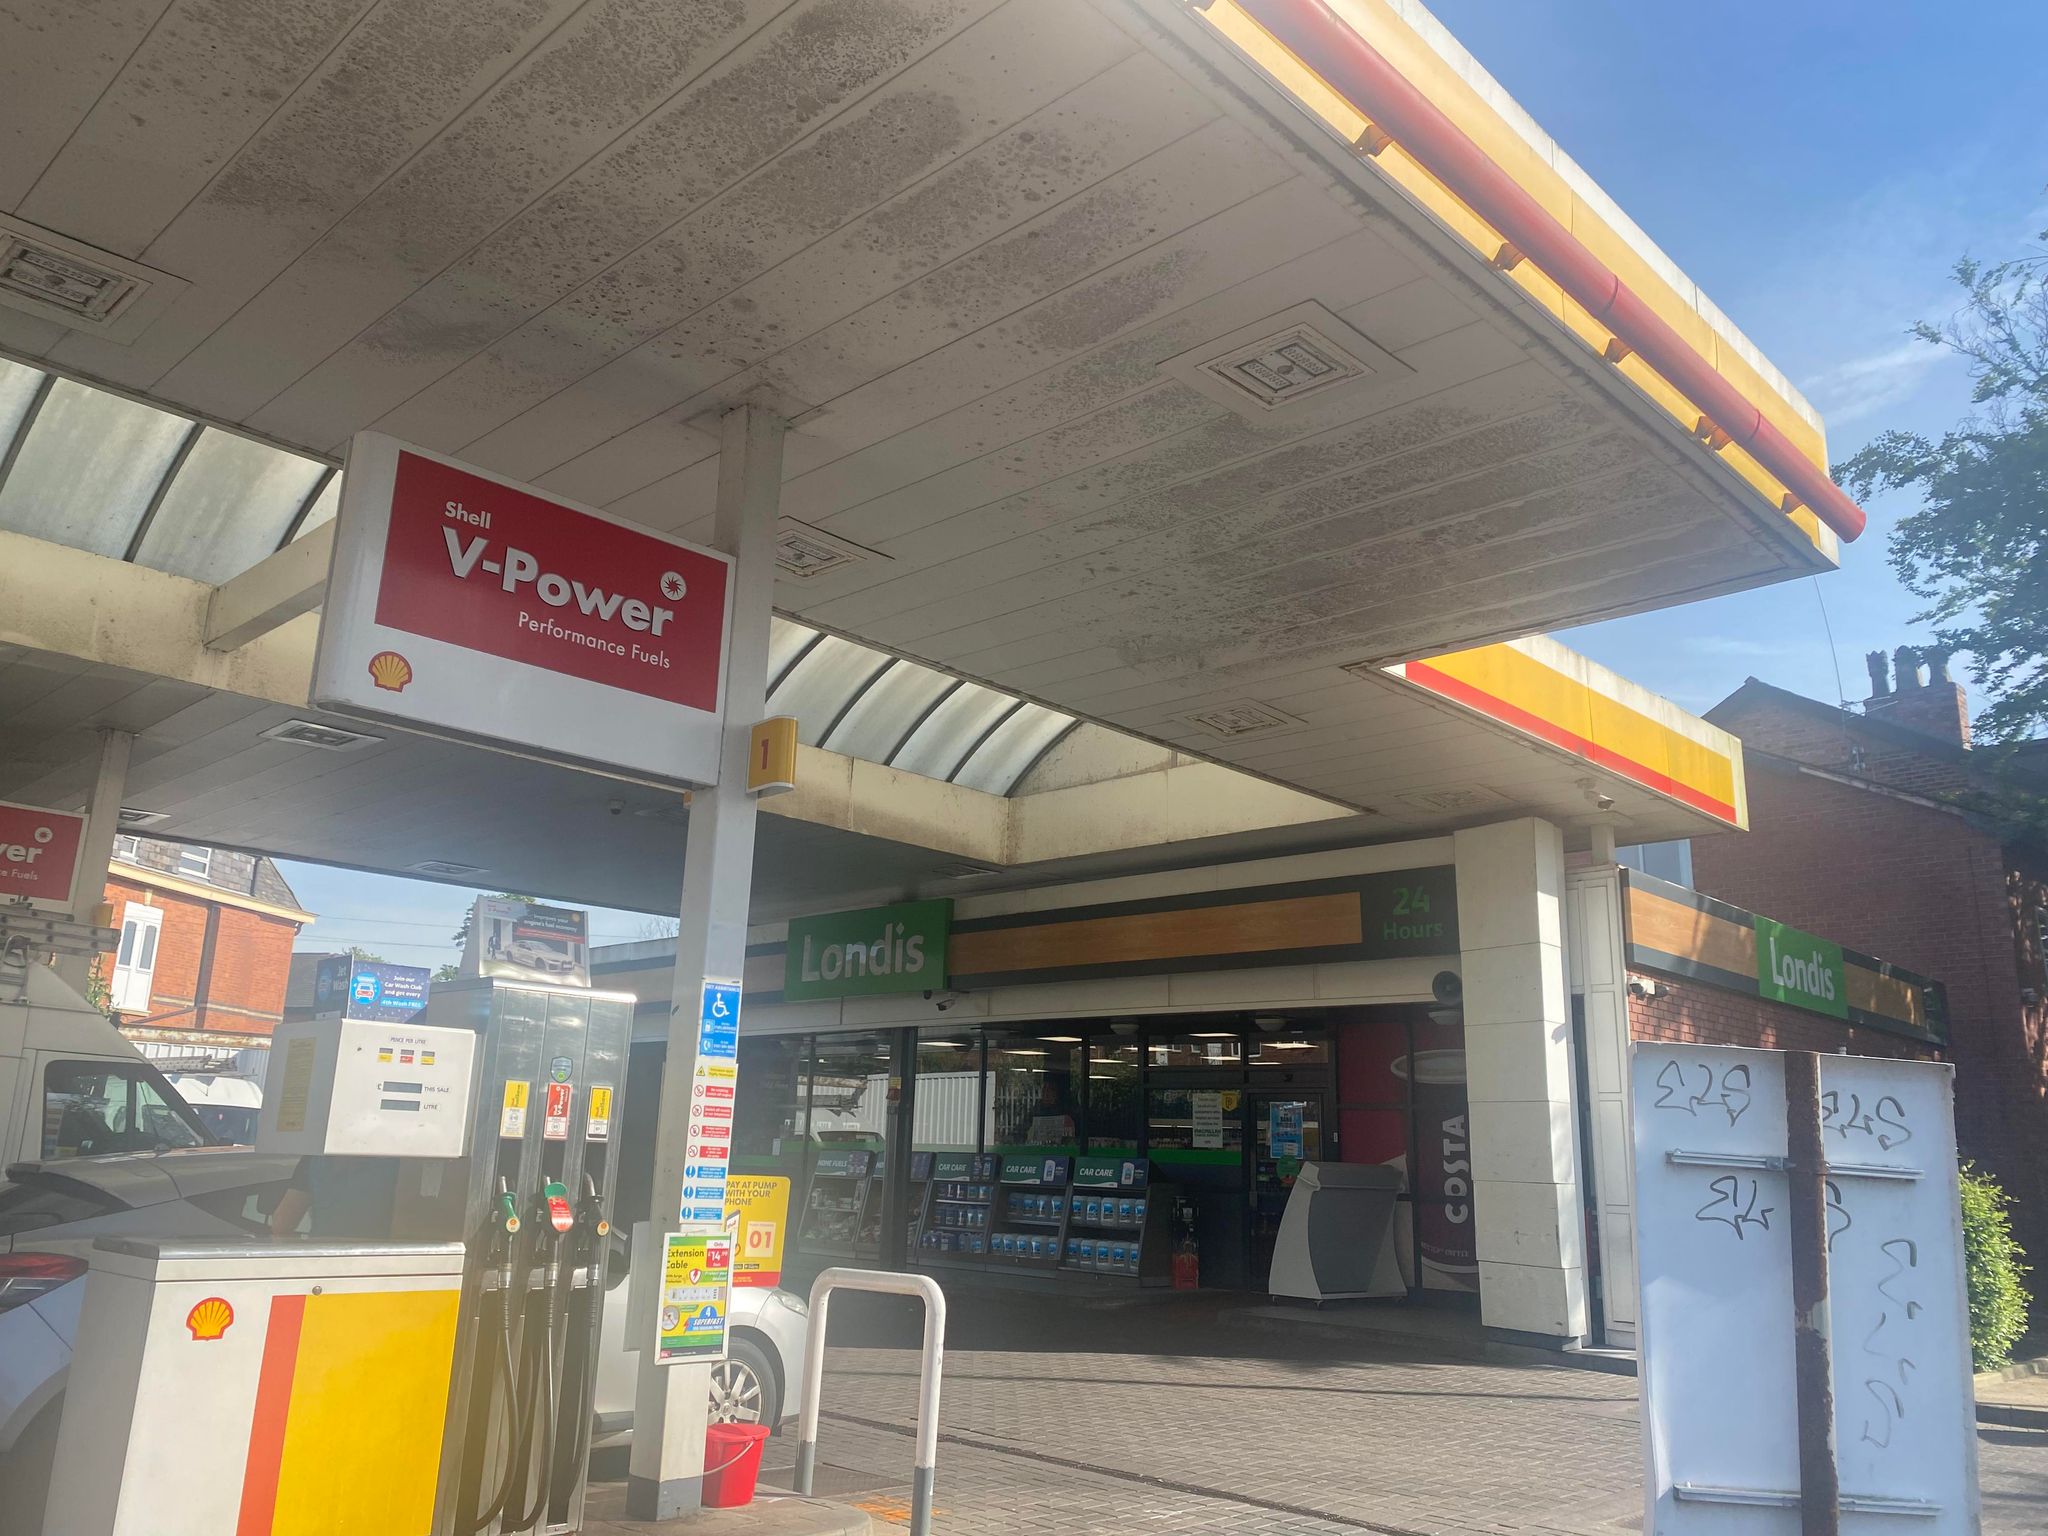 Shell Garage, Wilmslow Road -Image: Kate Gaetto.